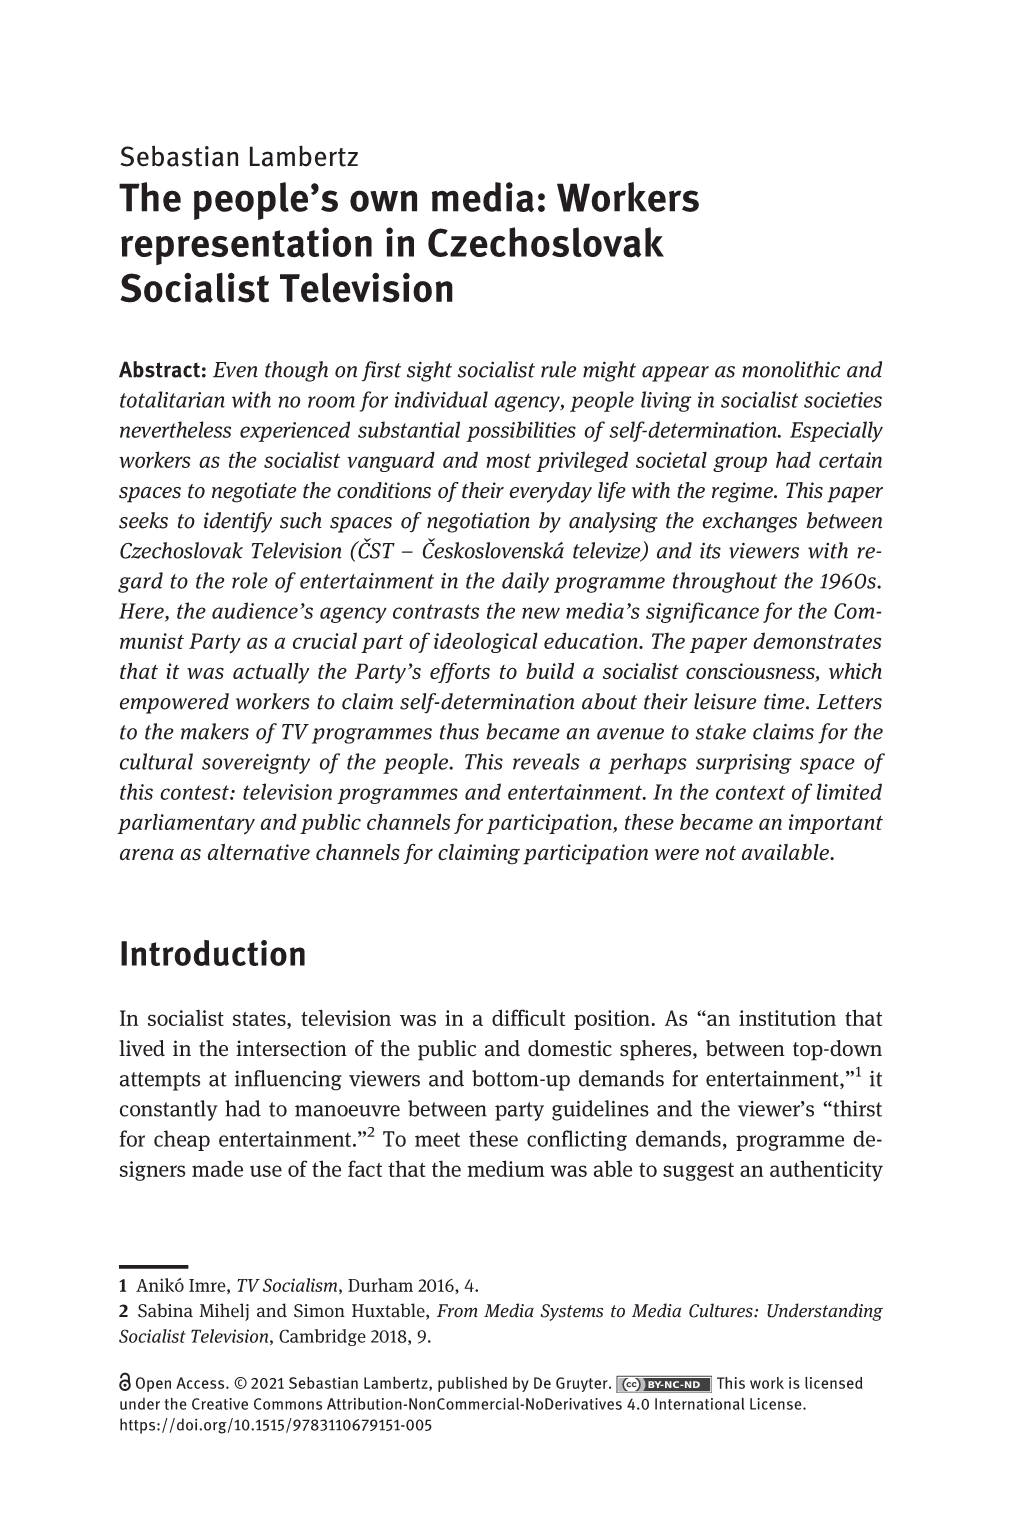 Workers Representation in Czechoslovak Socialist Television